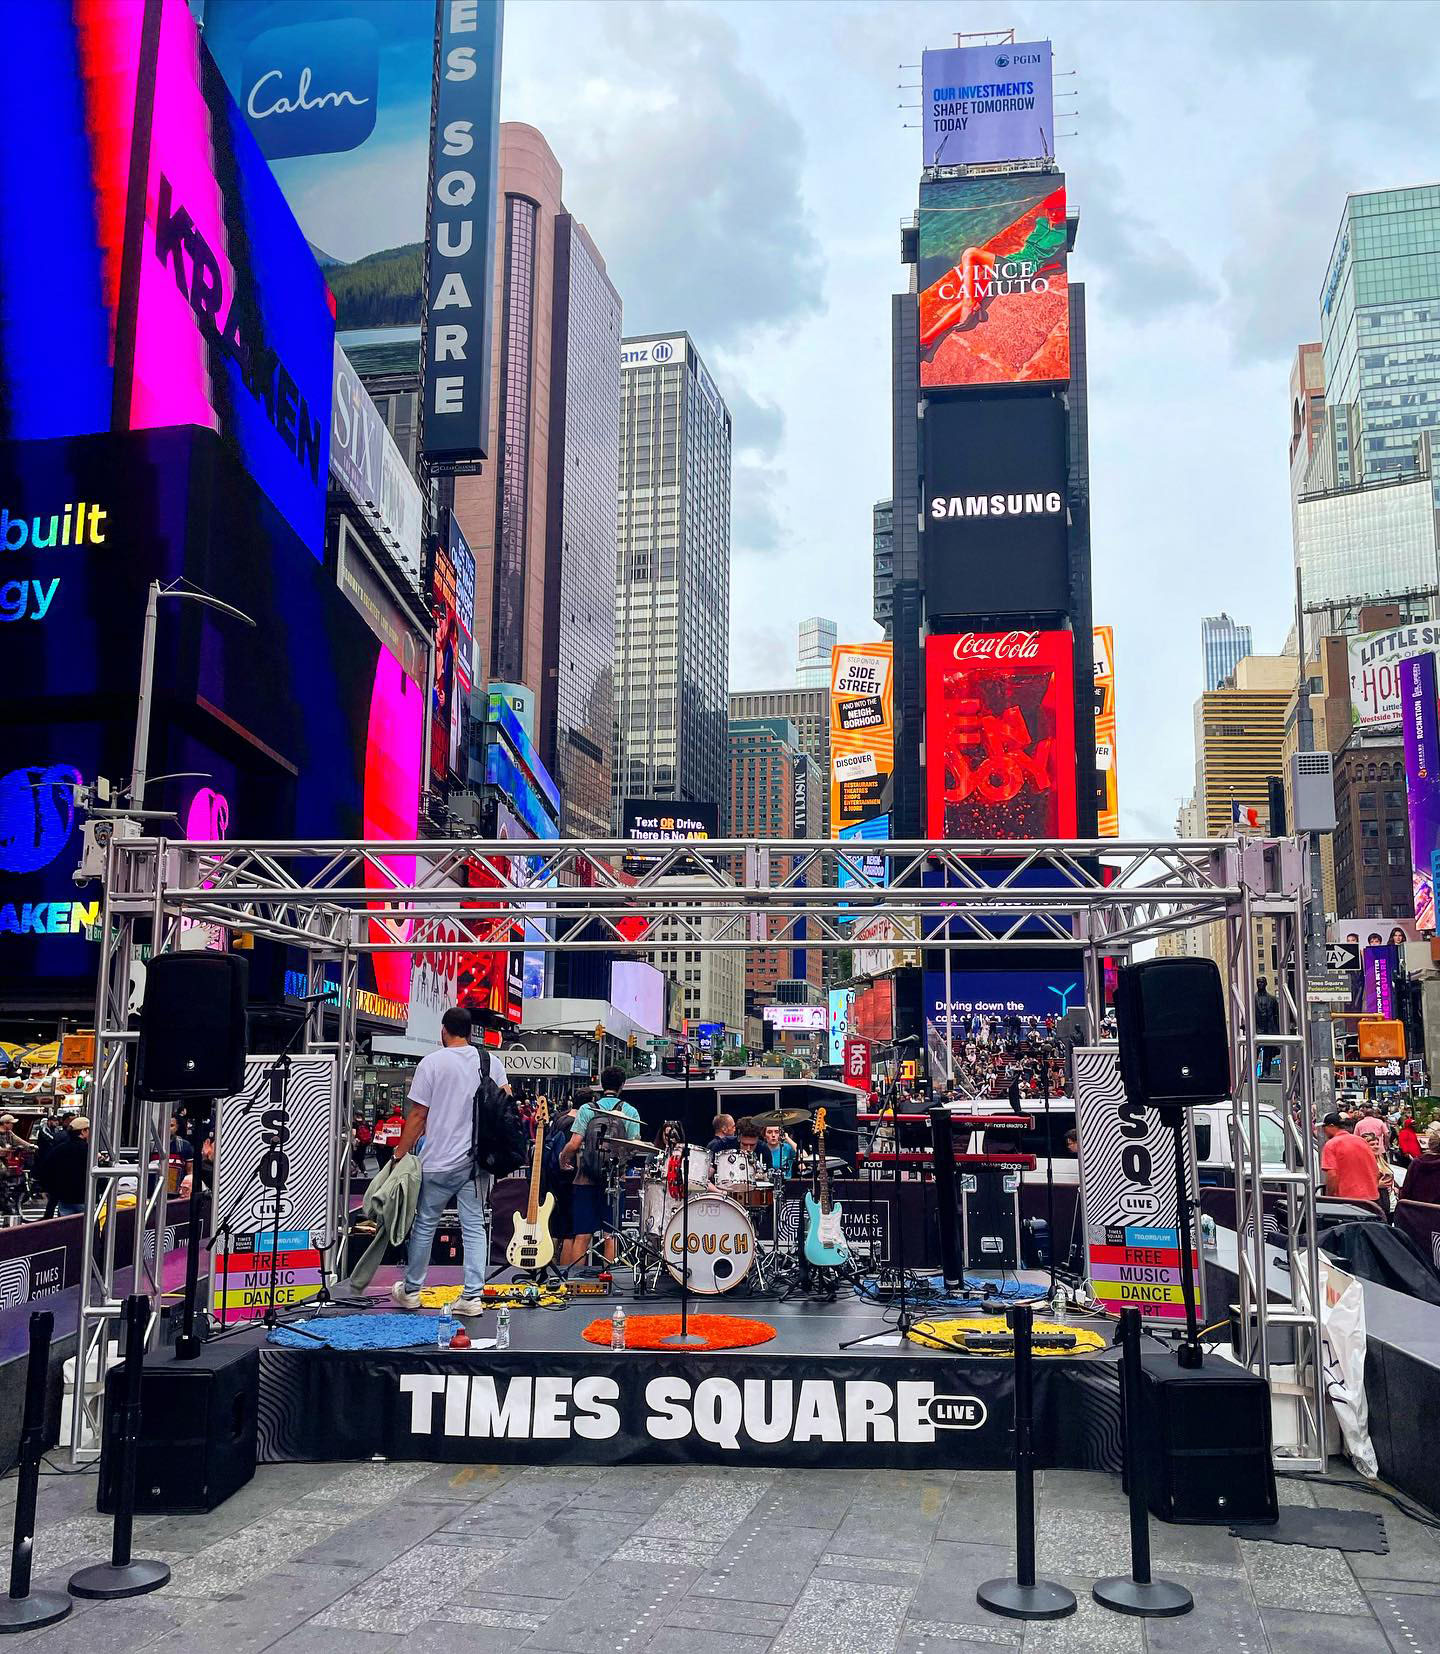 The band Couch played a high-energy show during the Times Square Live Friday Concerts Series utilizing a variety of products from RF Venue for dropout-free wireless microphone and in-ear monitor systems performance in one of the world’s most congested RF environments.